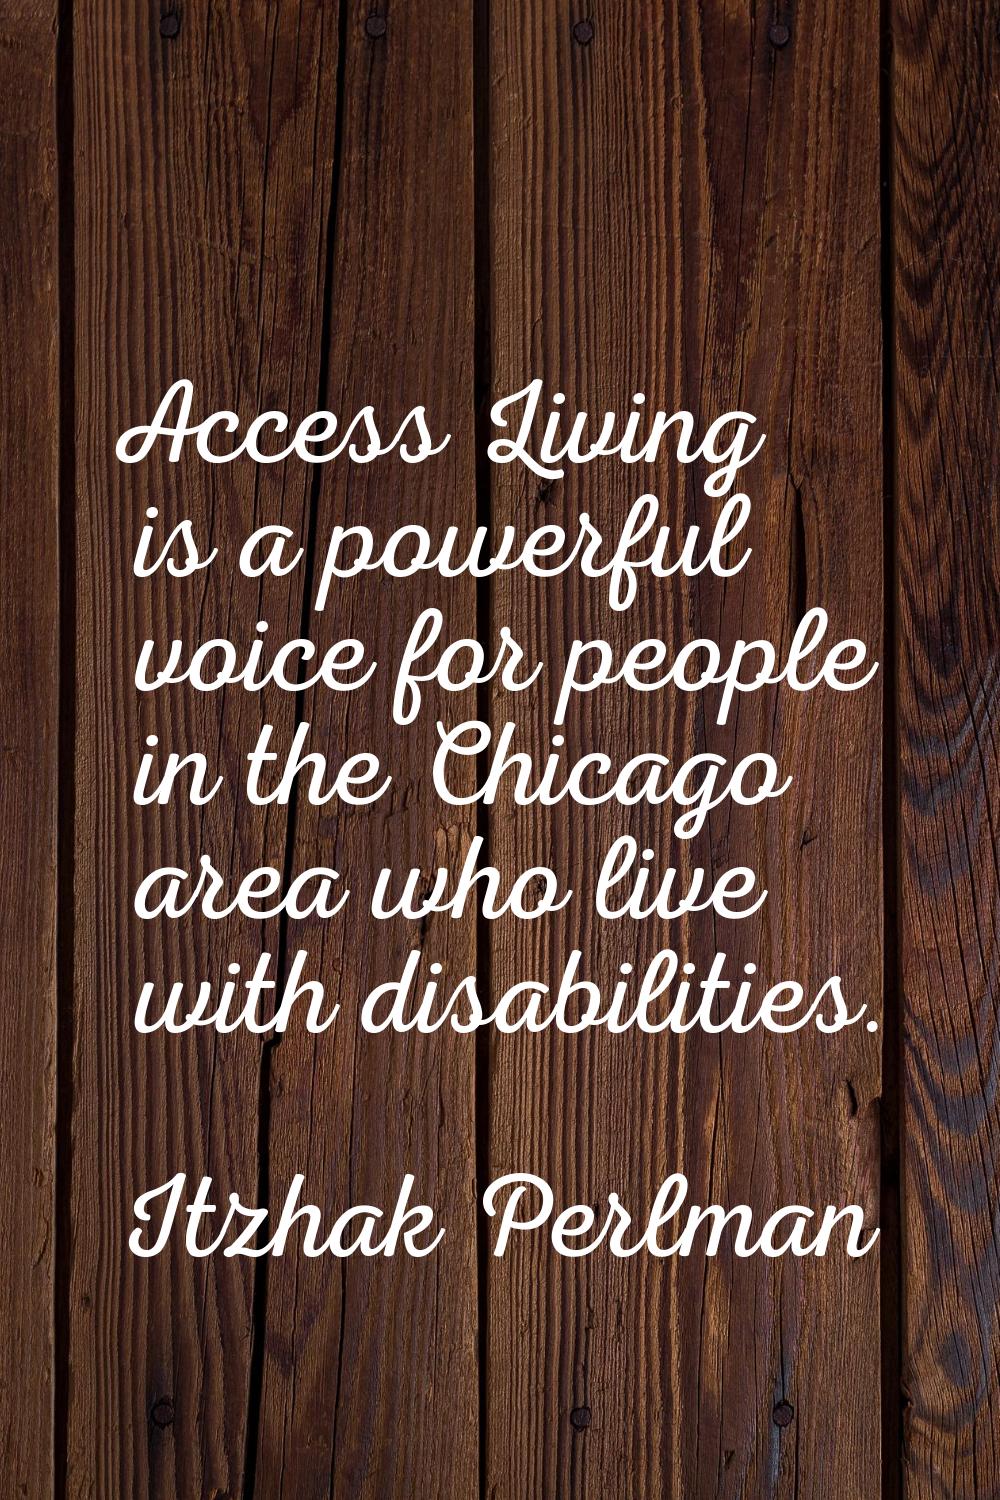 Access Living is a powerful voice for people in the Chicago area who live with disabilities.